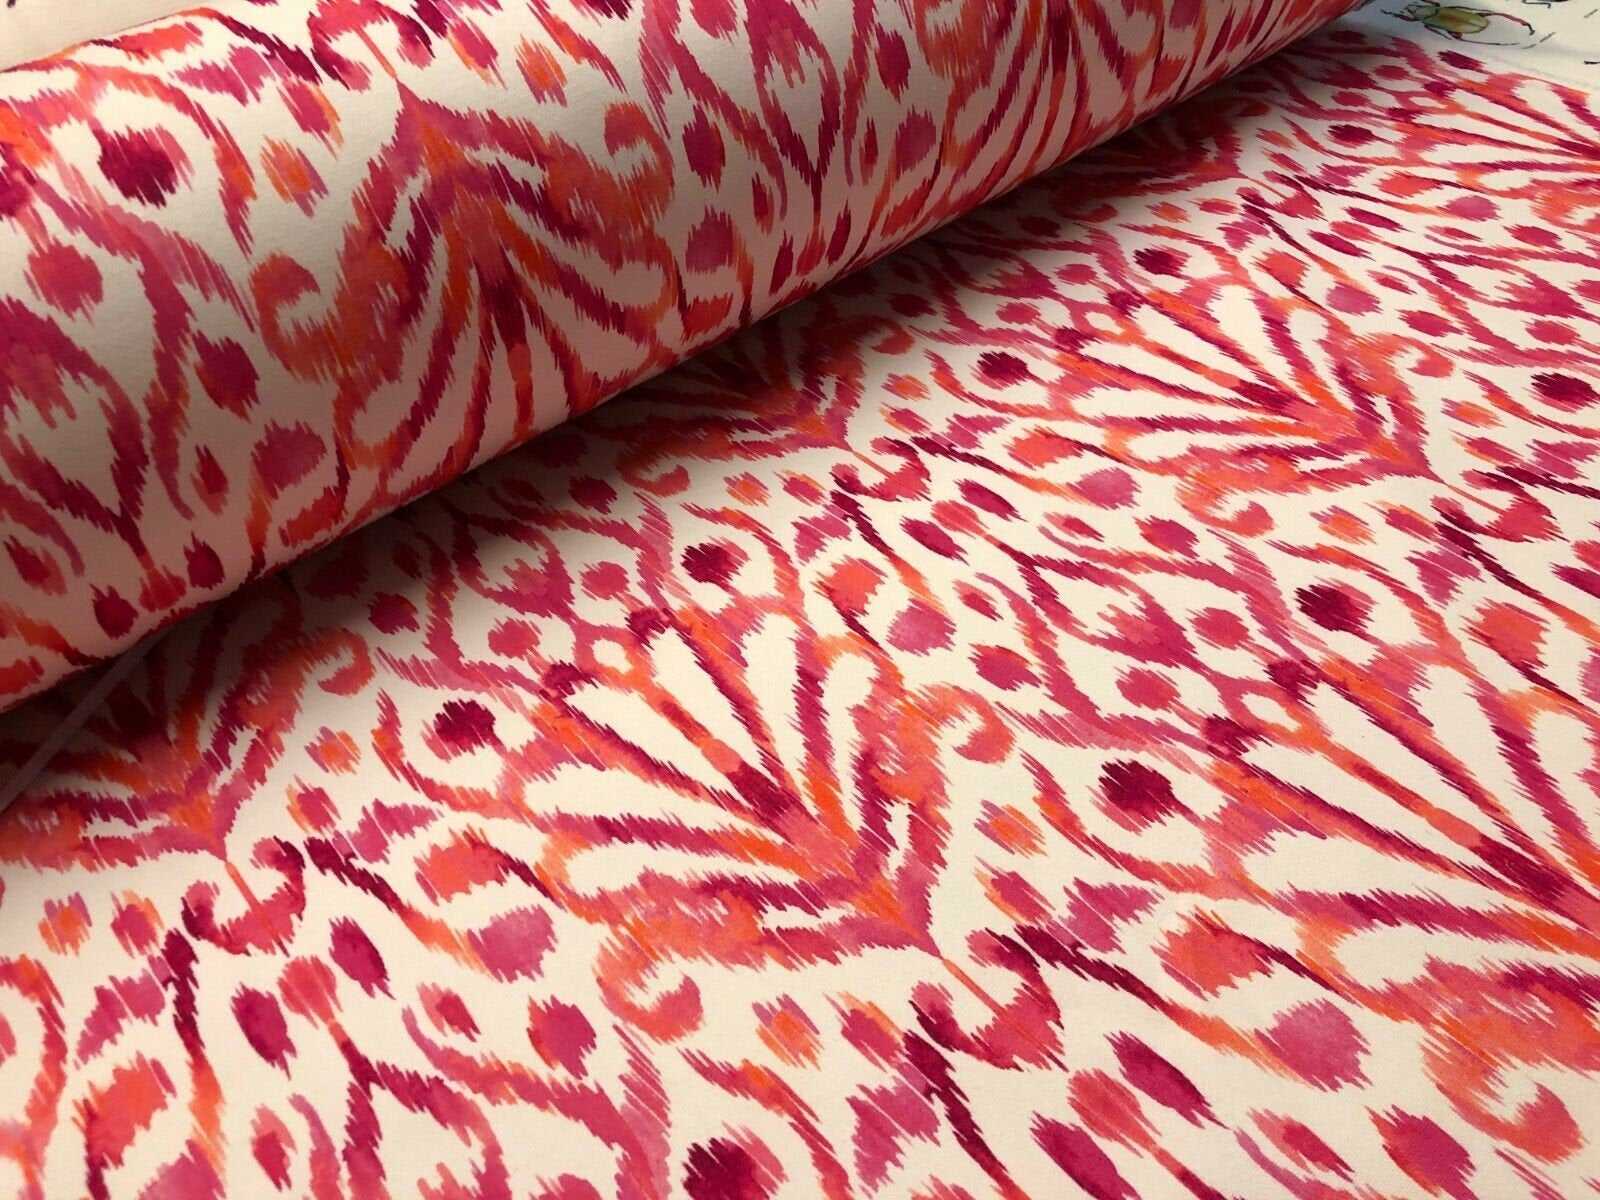 Pink IKAT Floral Fan Damask Flower Fabric Geometric Paisley Cotton Material  Curtain Upholstery Home Decor - 55/140cm Wide - Lush Fabric